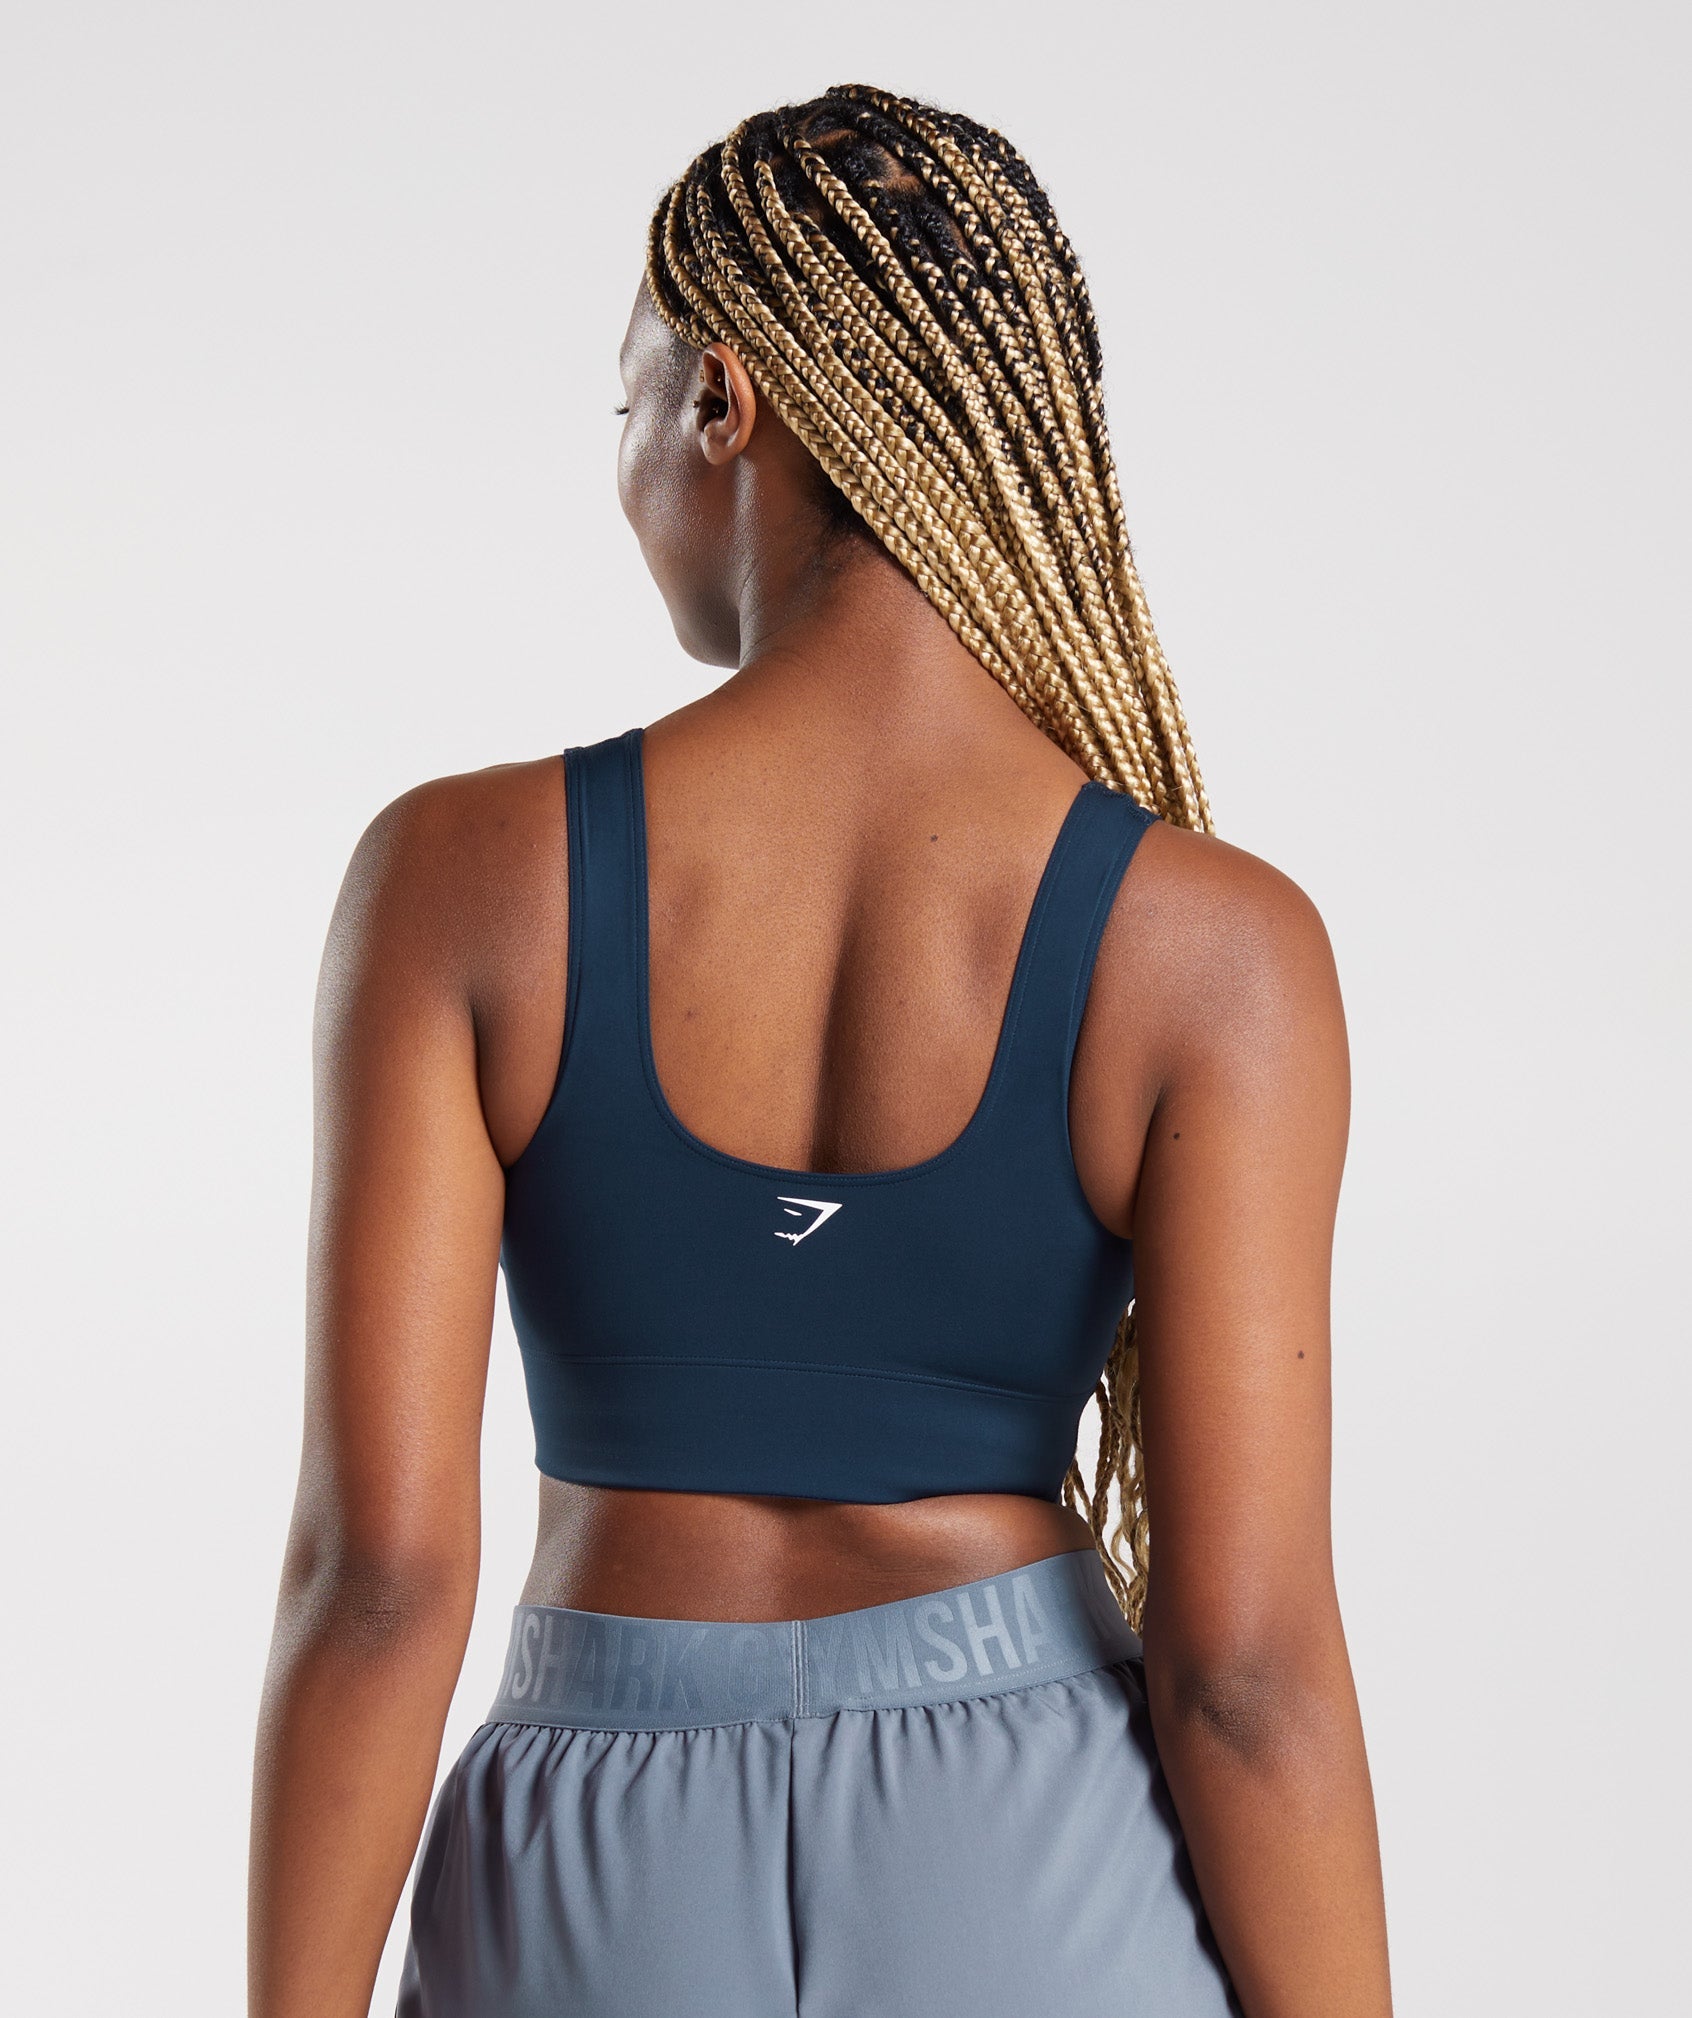 LU149 Shockproof Widen Hem Longline Yoga Bra For Women Push Up Workout  Shirt For Running, Gym, And Fitness Crop Top Brassiere From Rnoq, $19.28